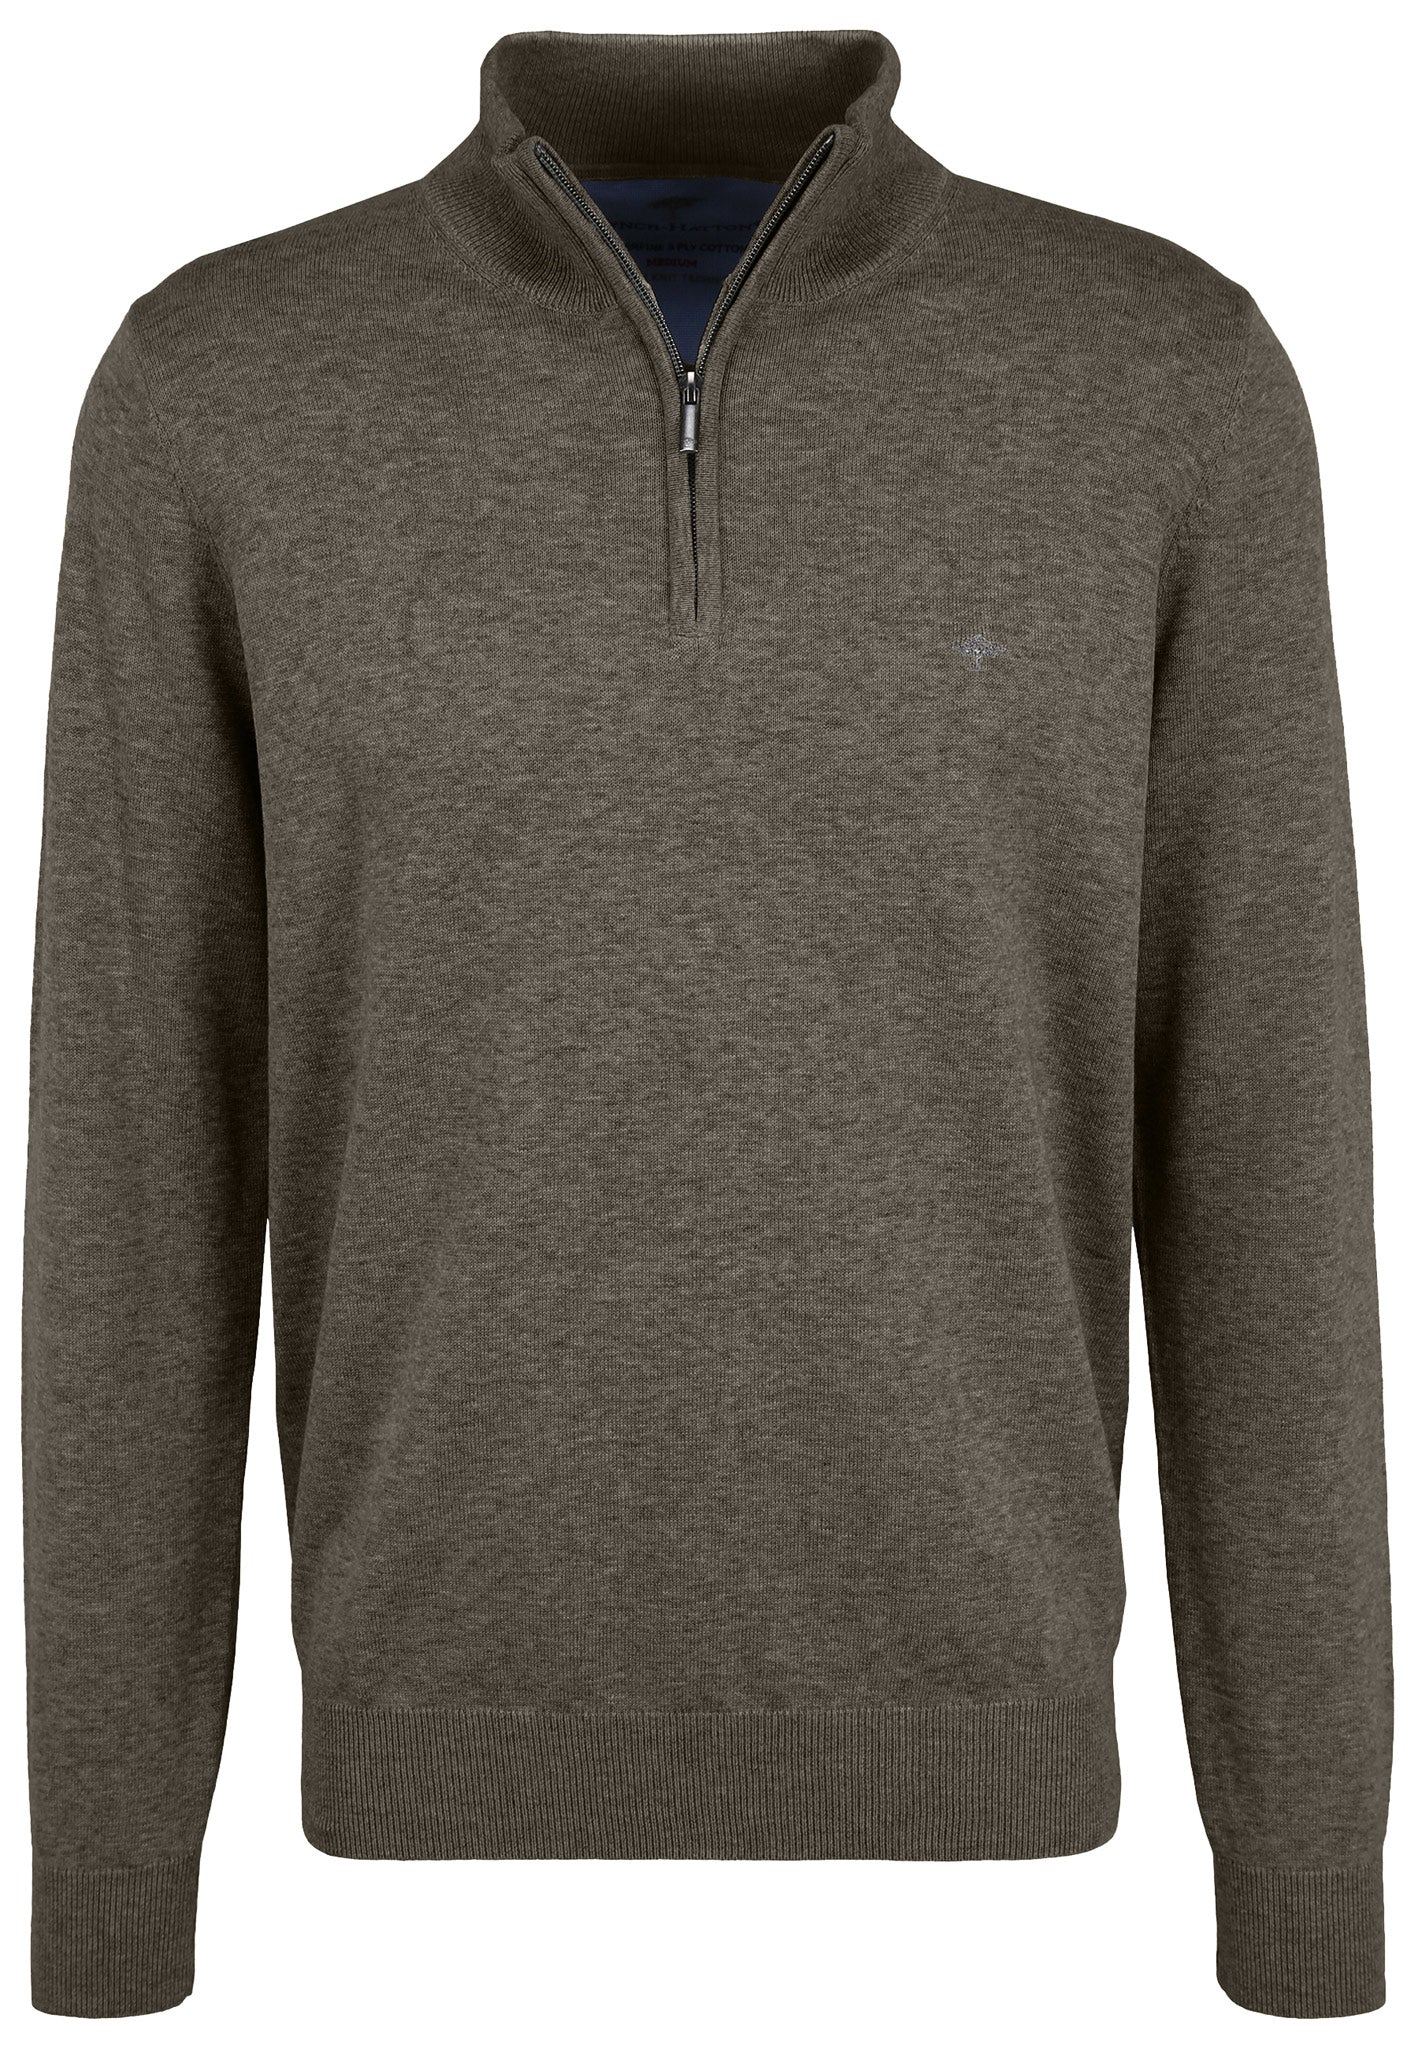 Fynch Hatton Troyer Design Casual Fit Pullover, Knitwear in regular Classic fit.   Chosen in a earth colour. ( 1221  215  860)